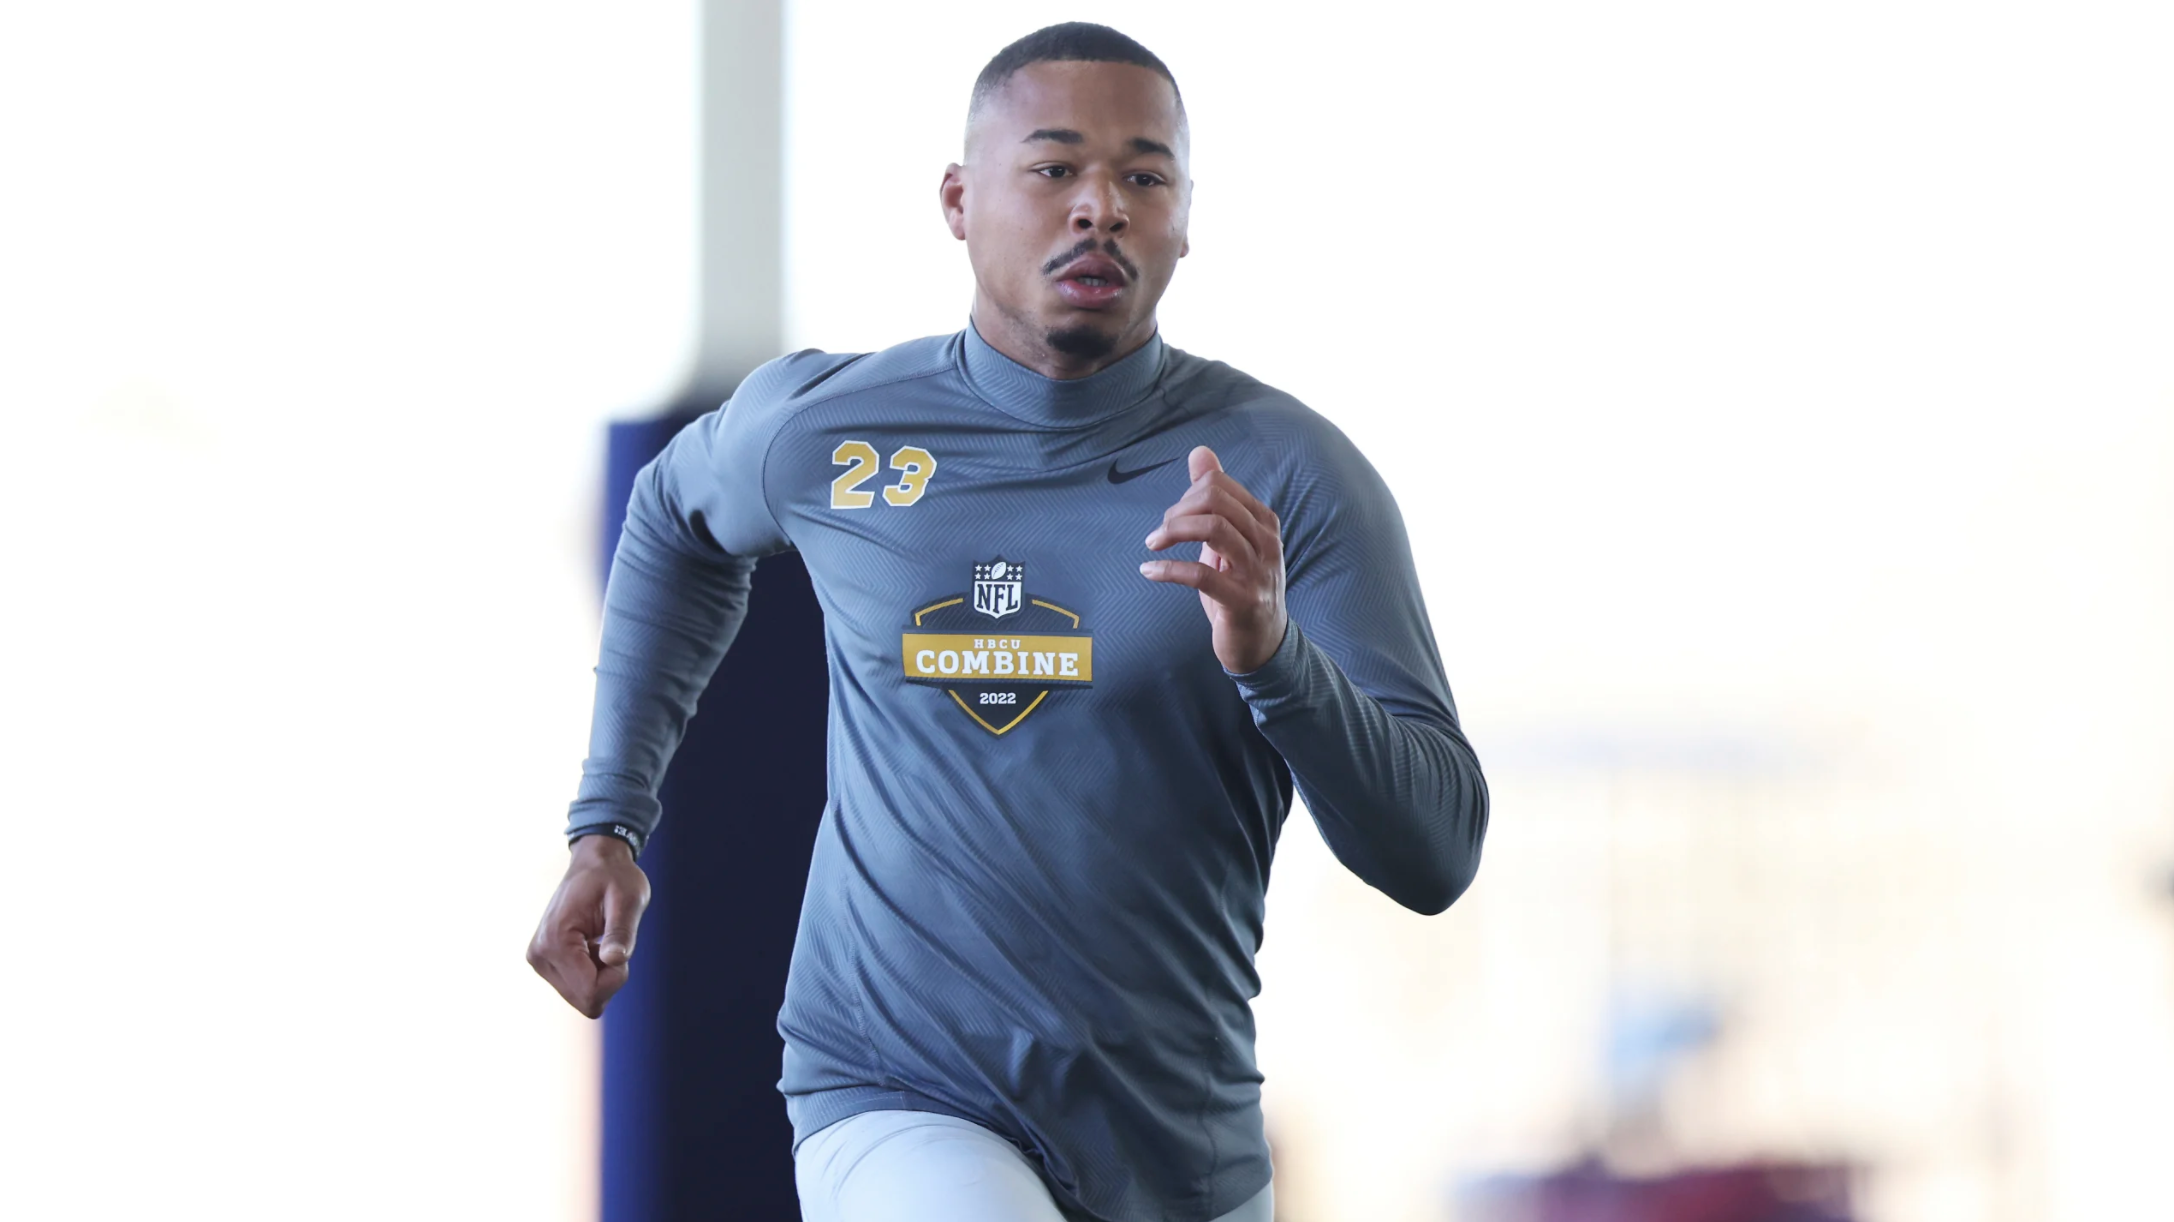 HBCU Combine: Braving the Elements to Chase a Dream - Boardroom